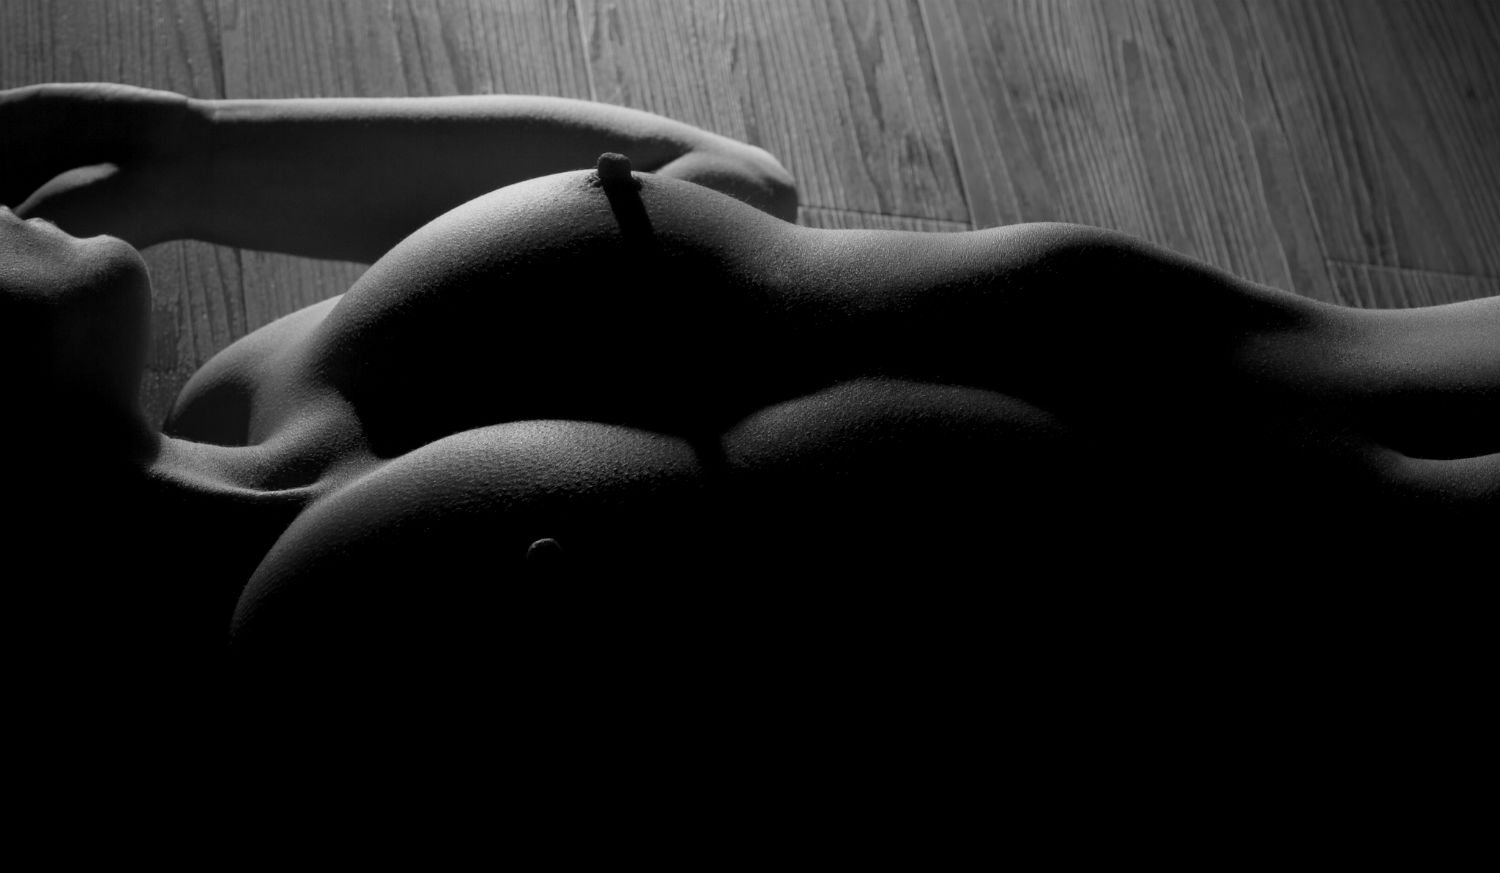 Erotic black and white photography